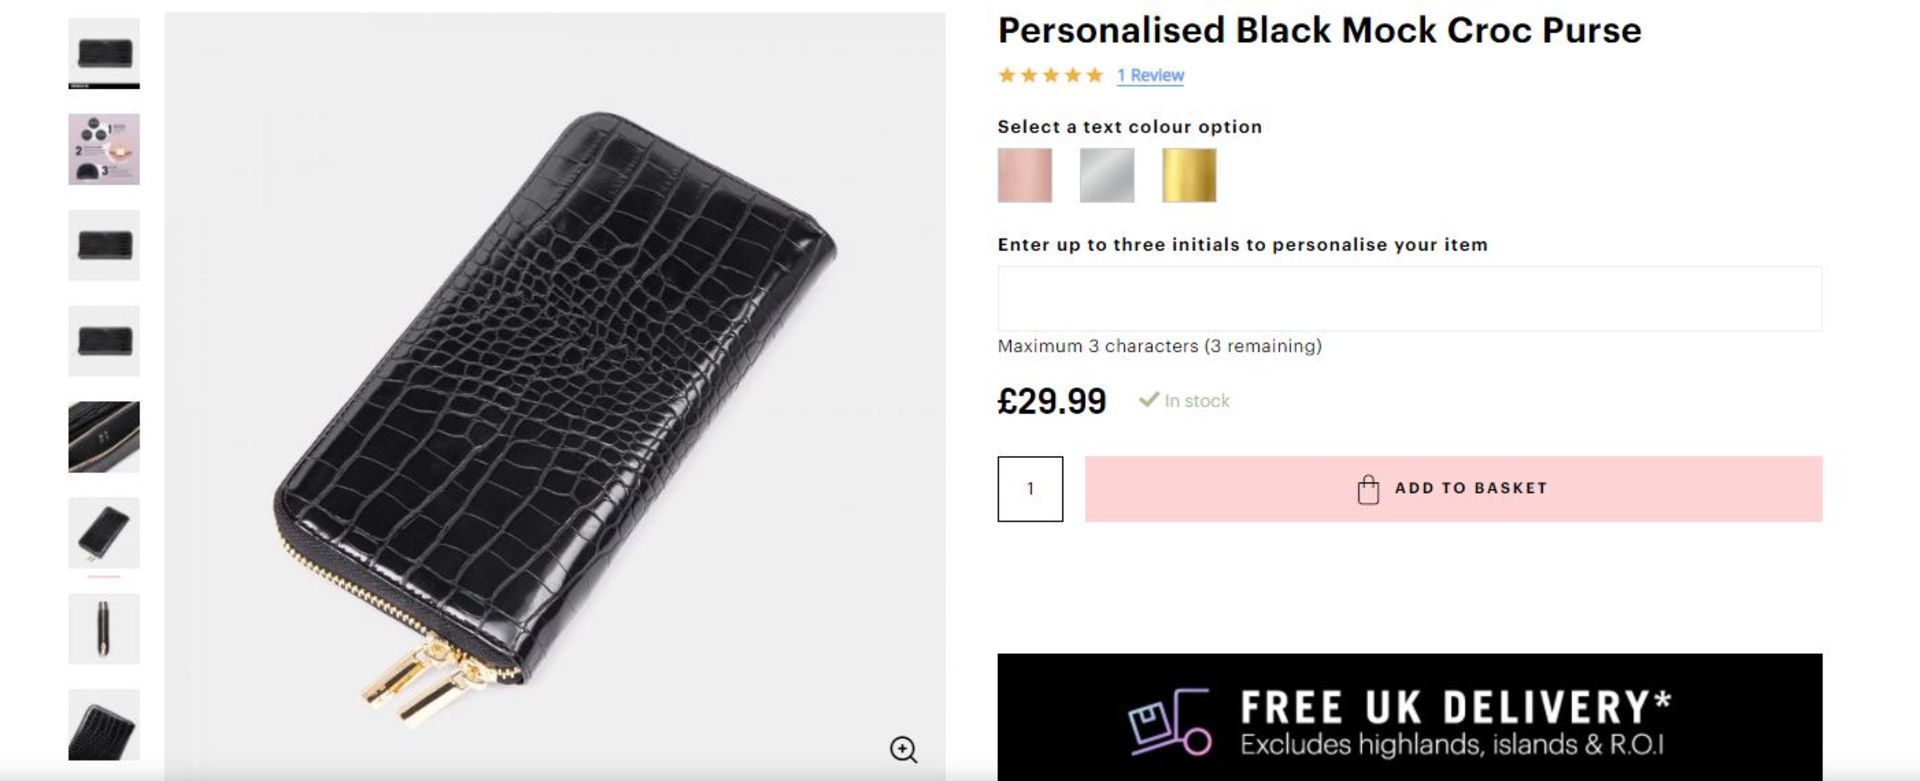 20 x NEW BOXED Beauti Mock Croc Luxury Purse - Black. RRP £29.99 each. NOTE: ITEM IS NOT